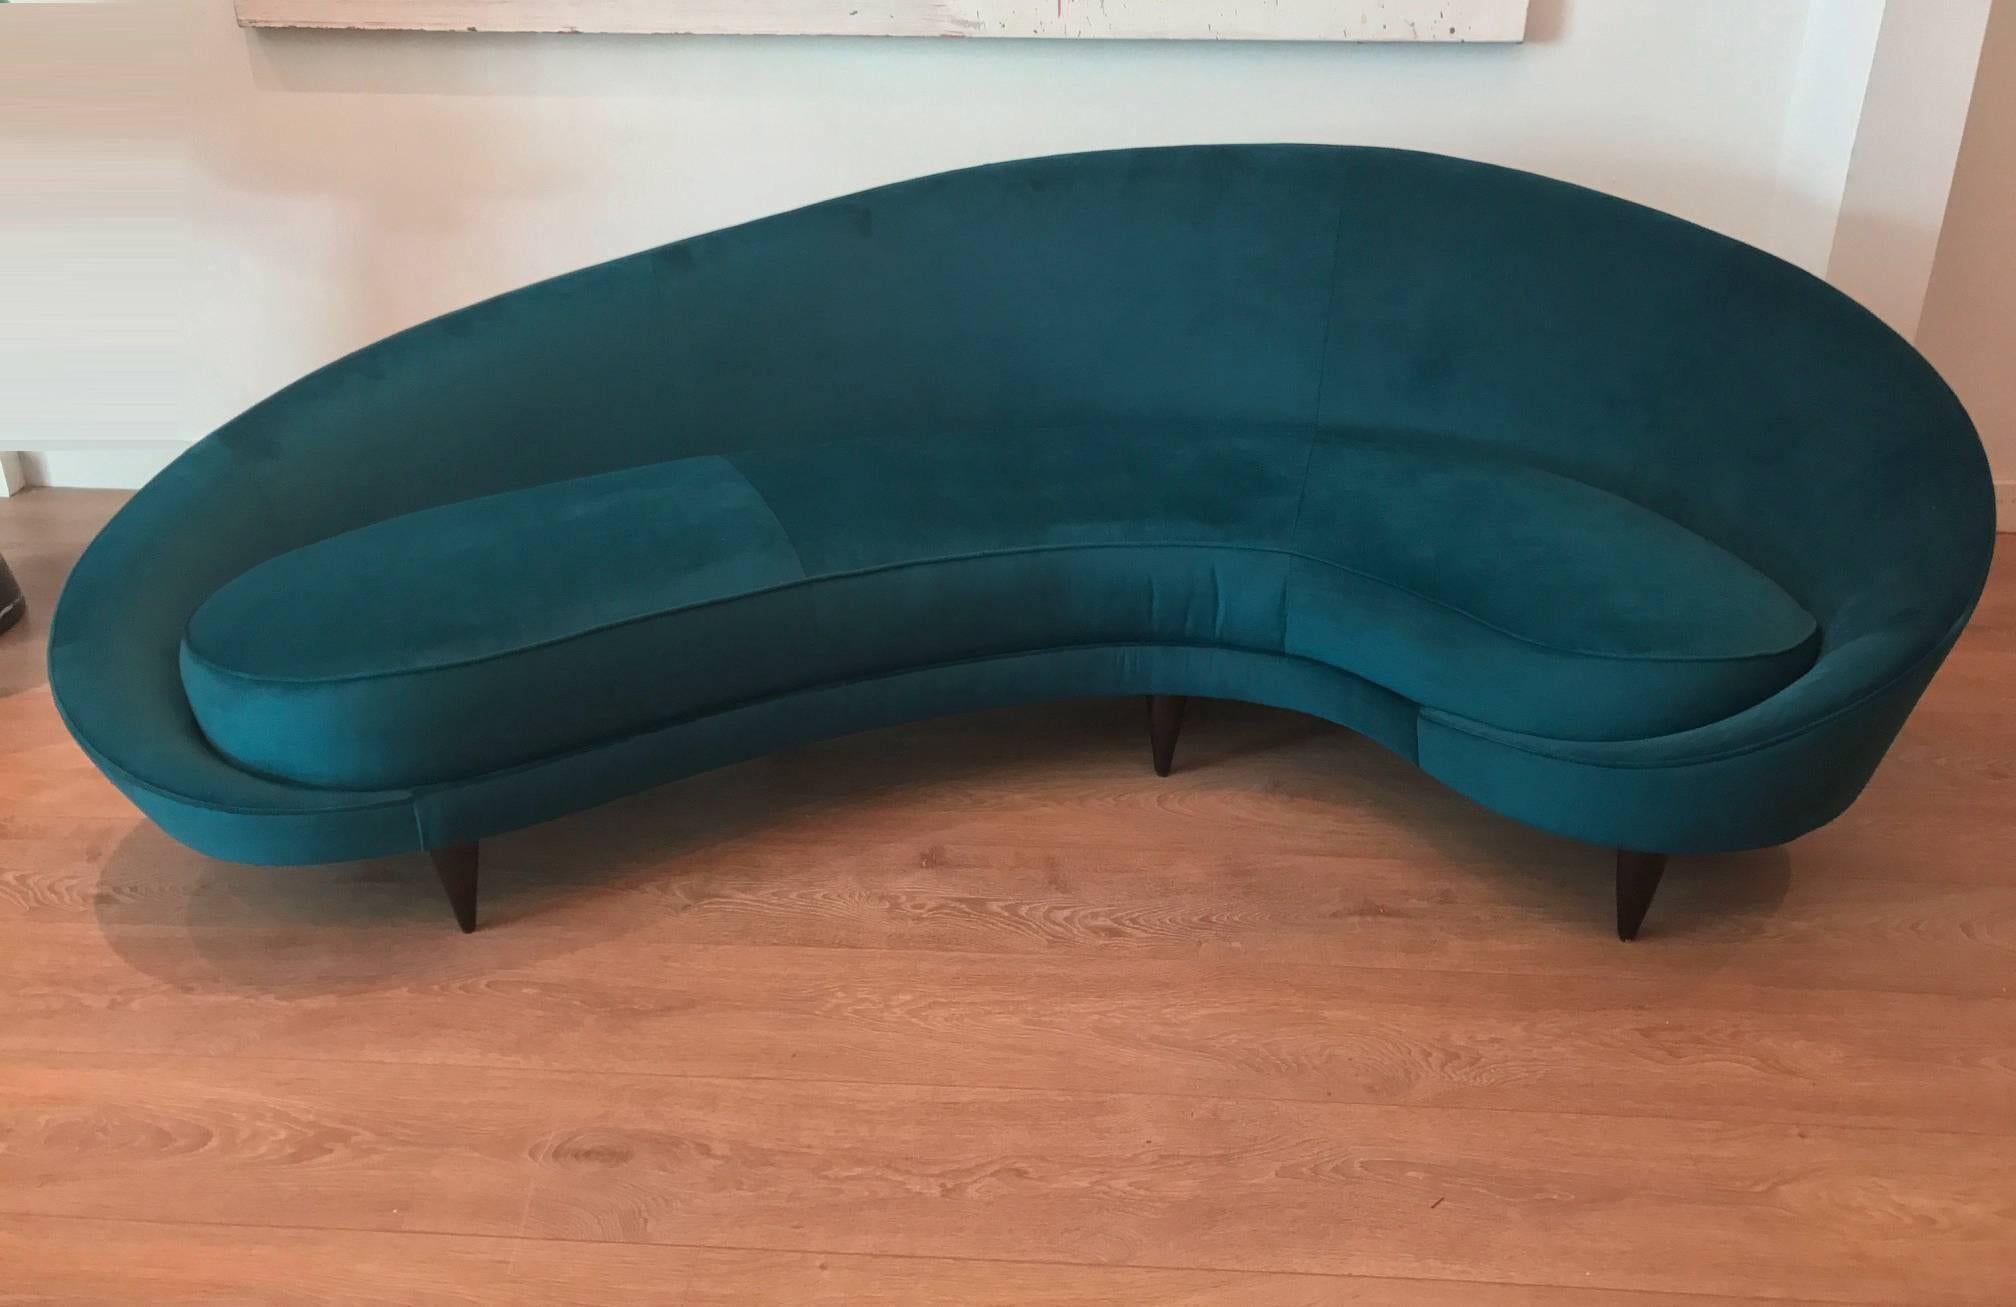 Mid-Century Italian large curved  sofa by Federico Munari. Newly upholstered with peacock blue velvet by Thompson (Caspian blue), dark stained conical wooden legs.
Very sensual curves and absolutely comfortable, please check pictures and listings